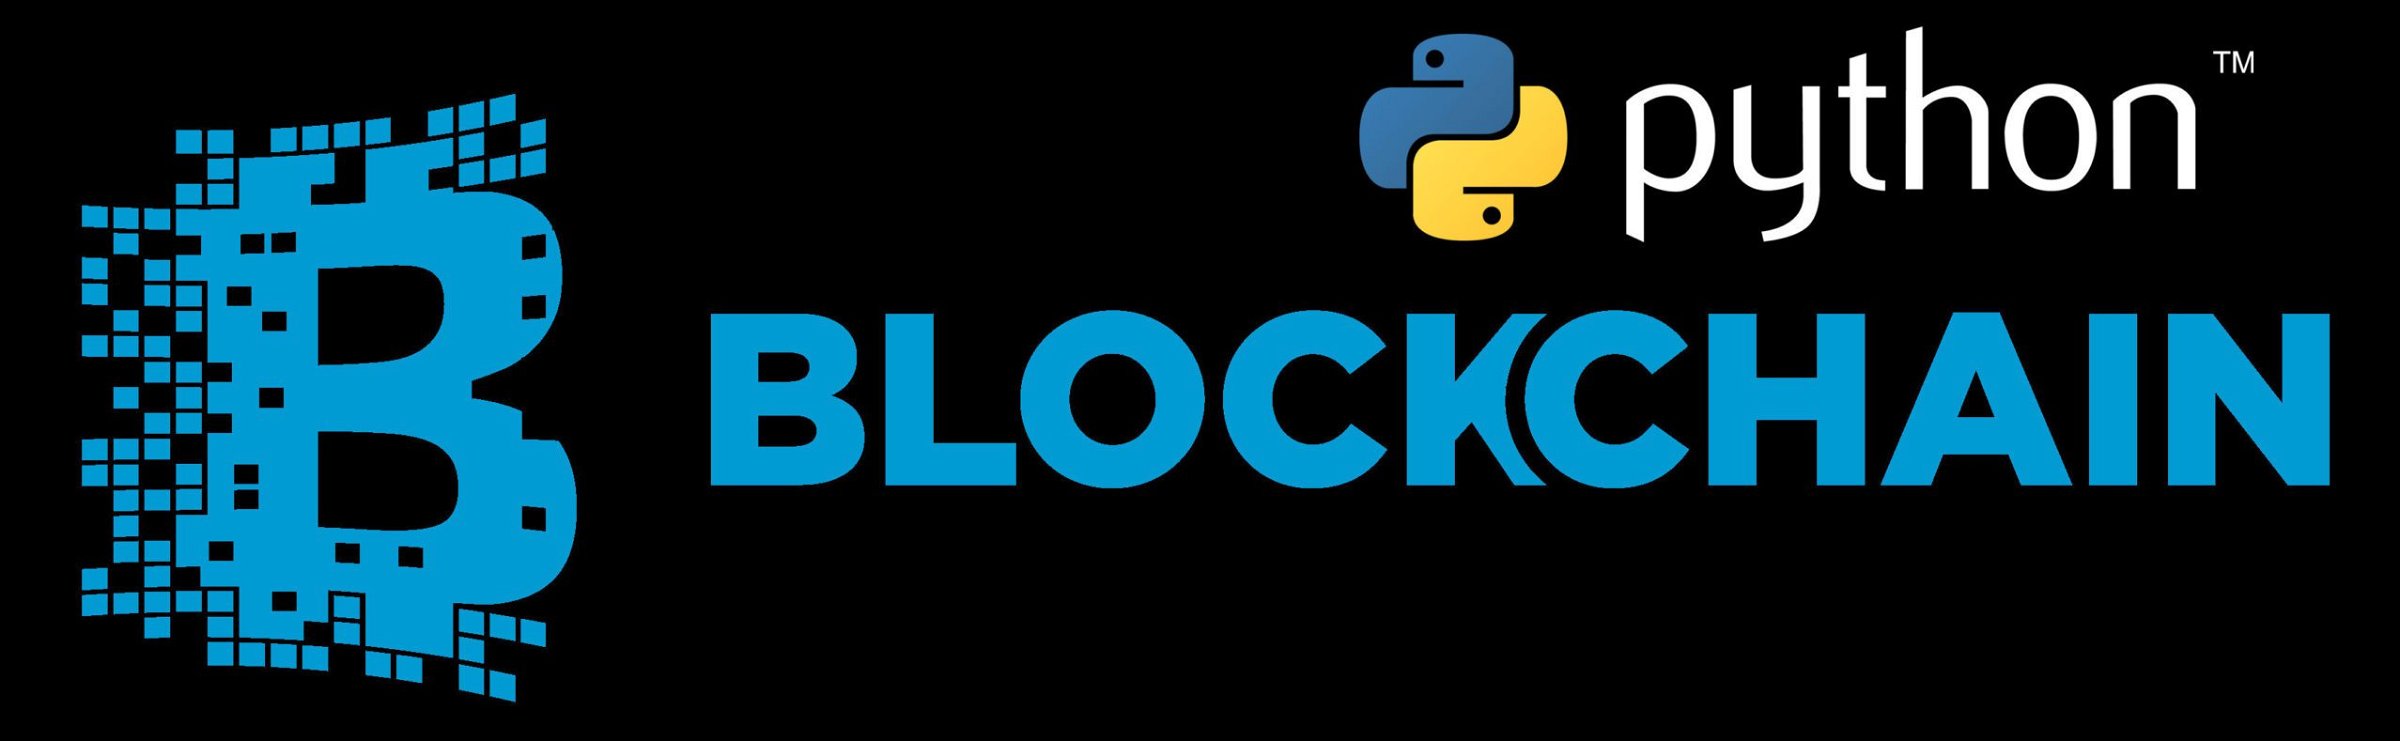 Python makes an excellent language for a blockchain training project and here is why: